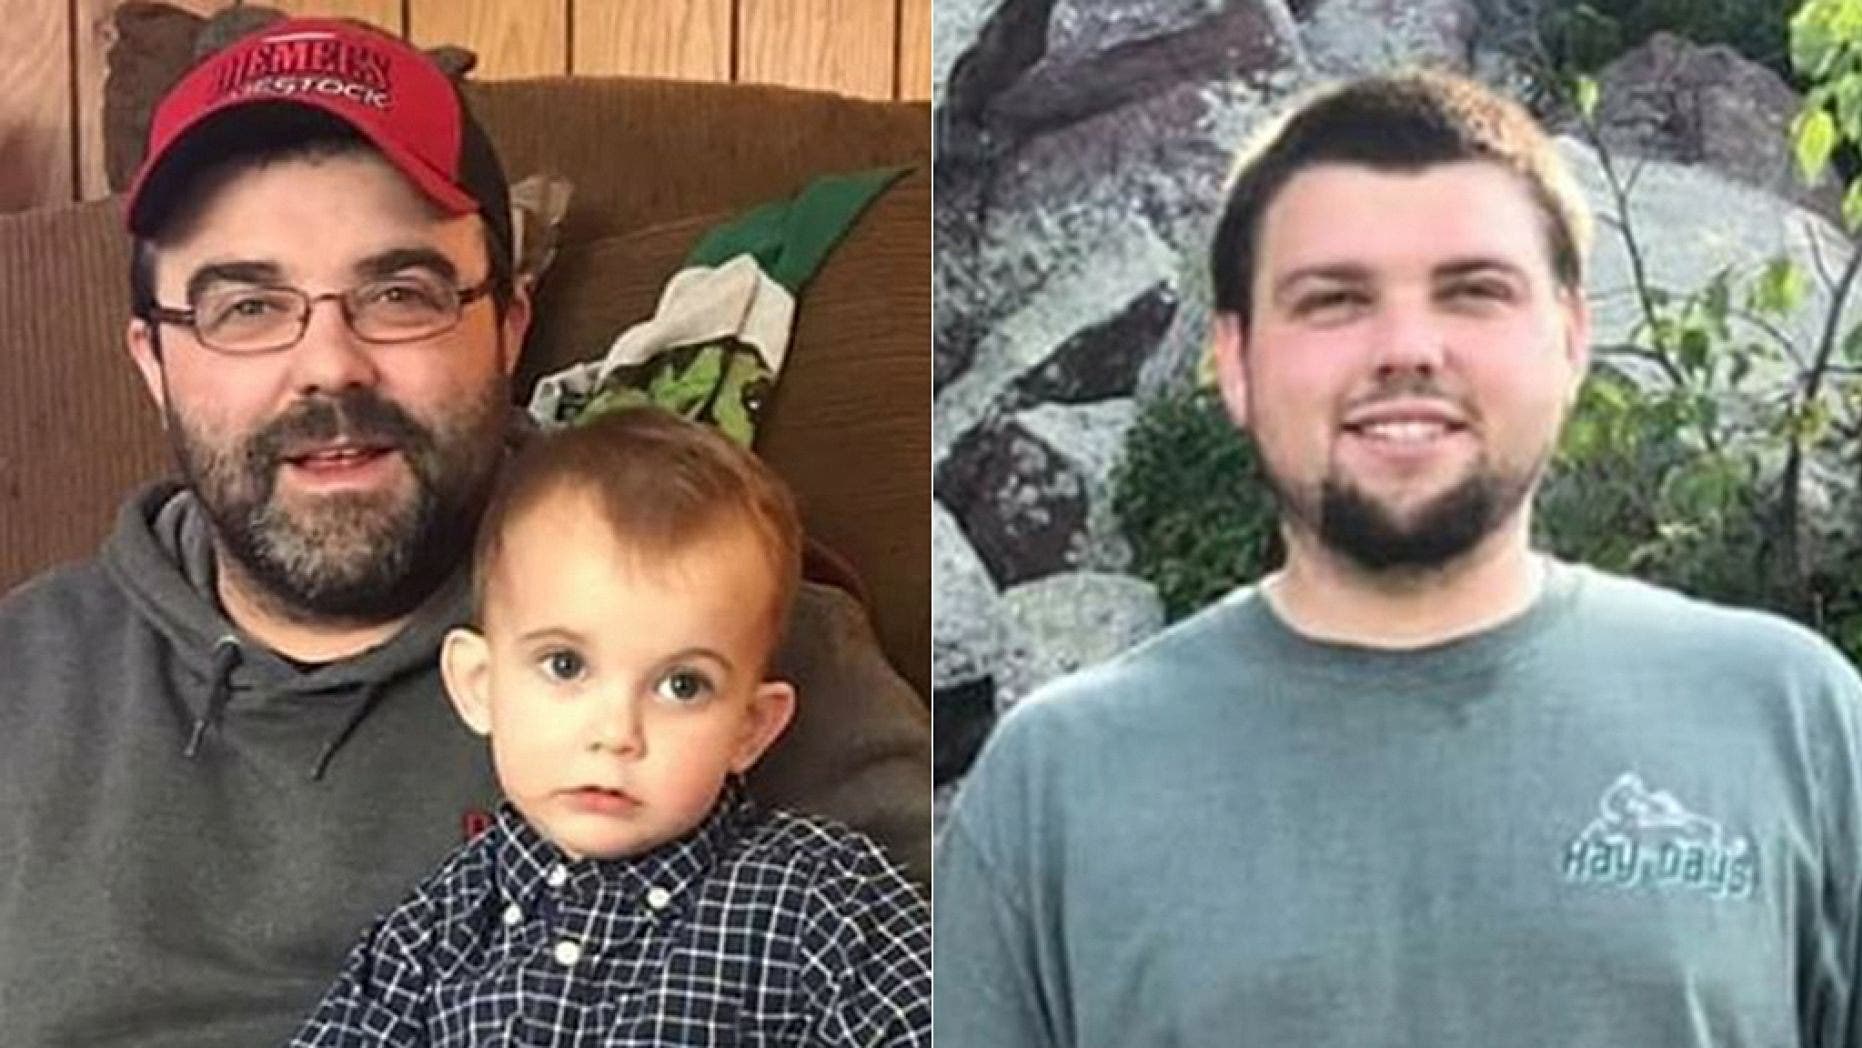 FOX NEWS: Human remains found on Missouri farm where brothers were last seen, police say